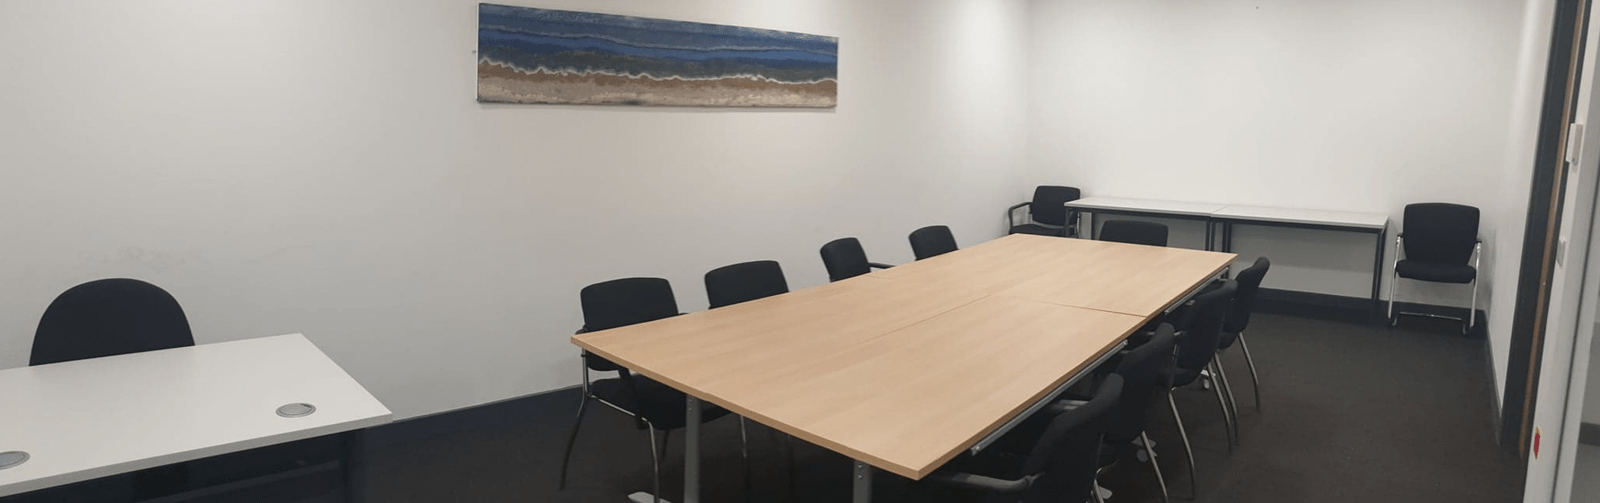 Meeting and Conference Room Hire